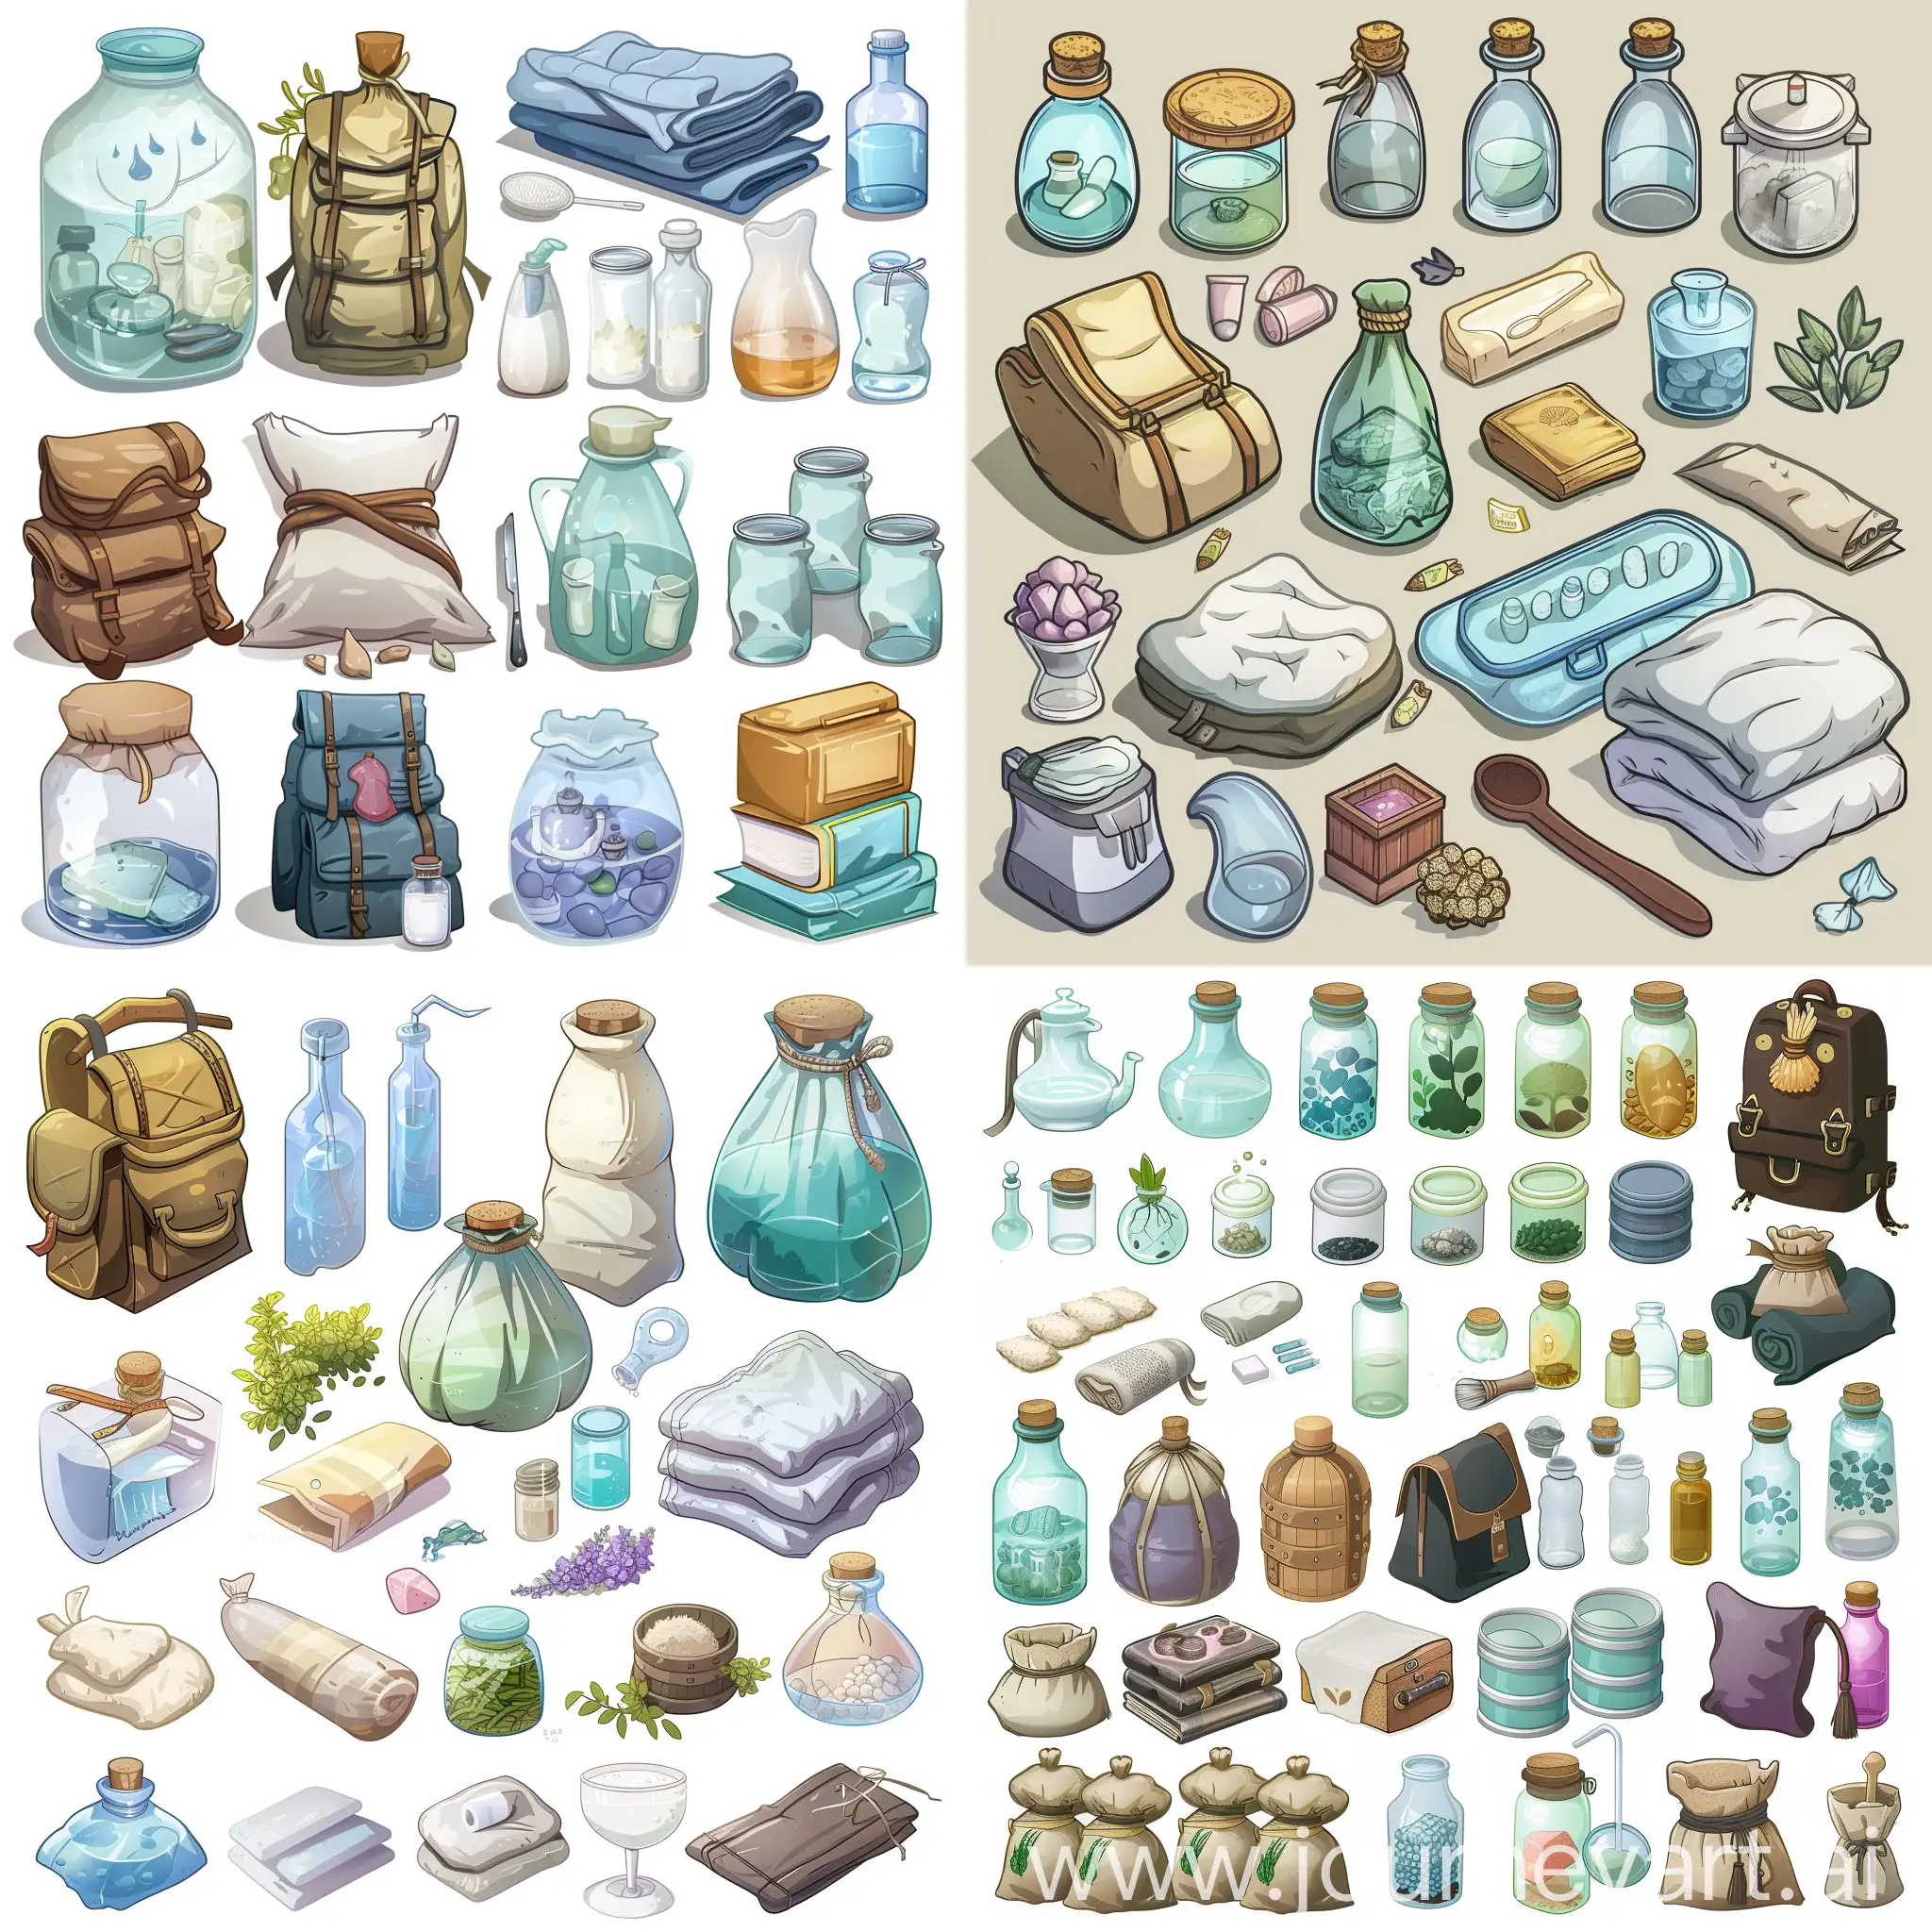 simple 2D illustration, 2D set of assets,  game backpack battles, magic household setting with various items and practices aimed at minimizing exposure to endocrine disruptors. Include visual elements such as glass containers, natural soap, wool or cotton bedding, filtered water, and other alternatives to common household items that may contain harmful chemicals, cartoon style